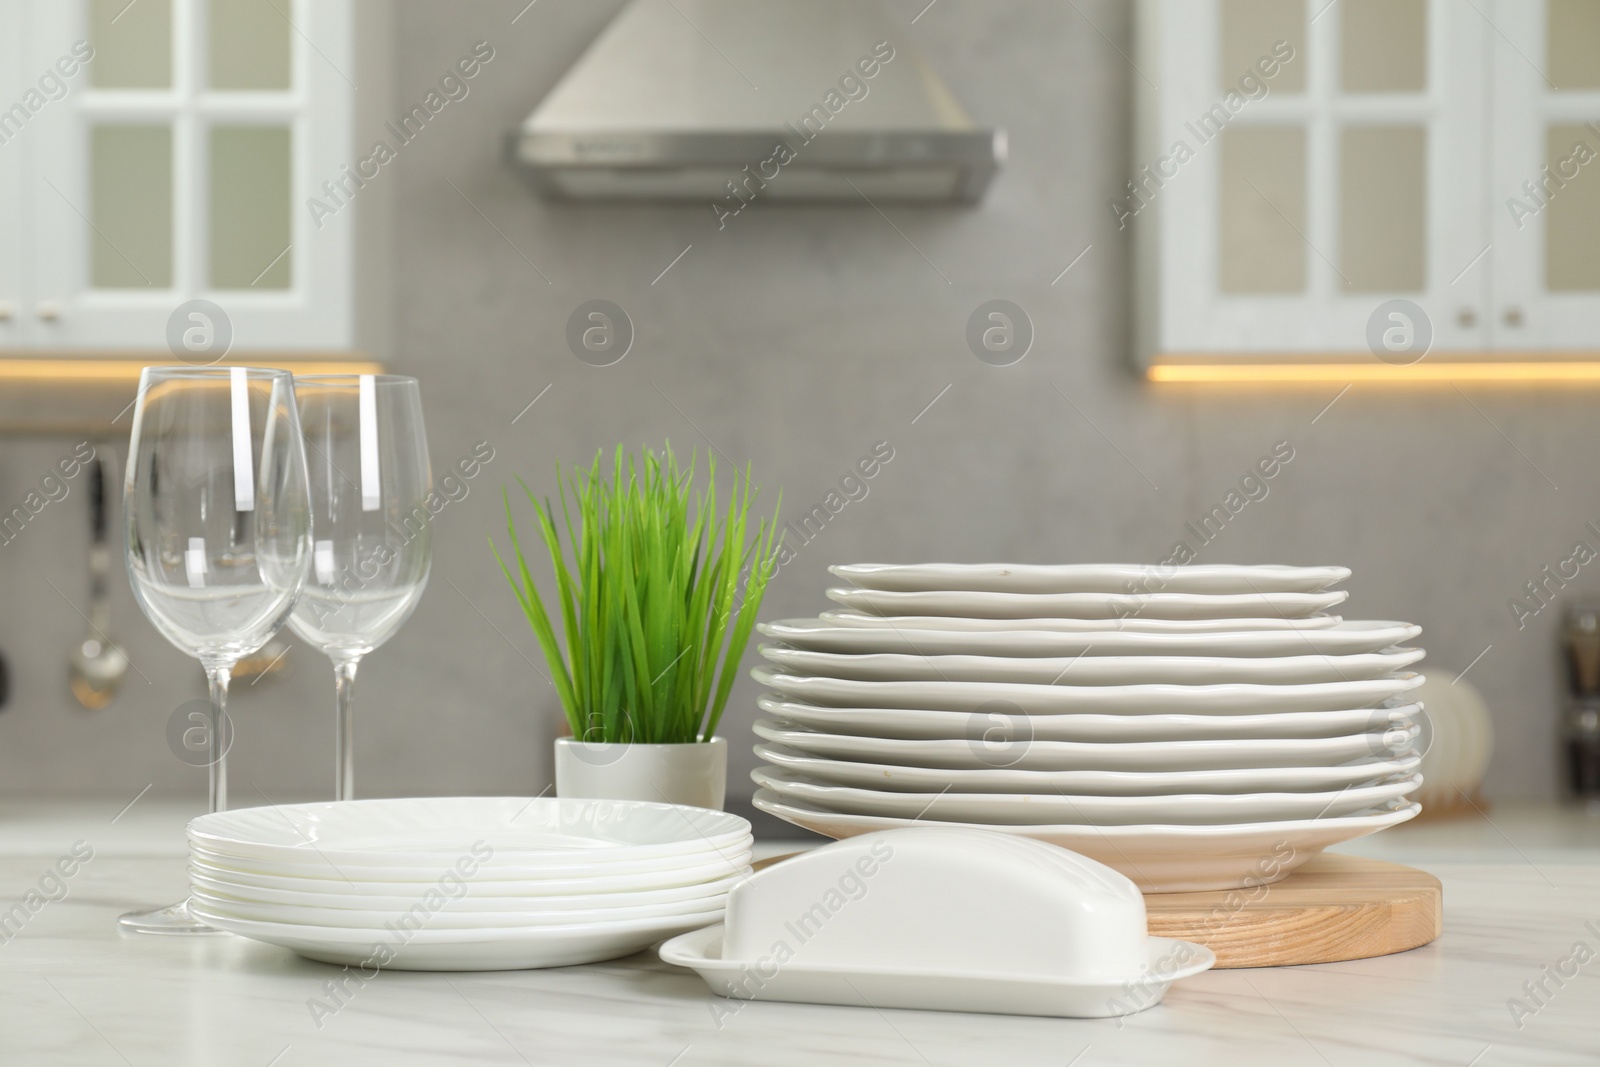 Photo of Clean plates, glasses, butter dish and floral decor on white marble table in kitchen